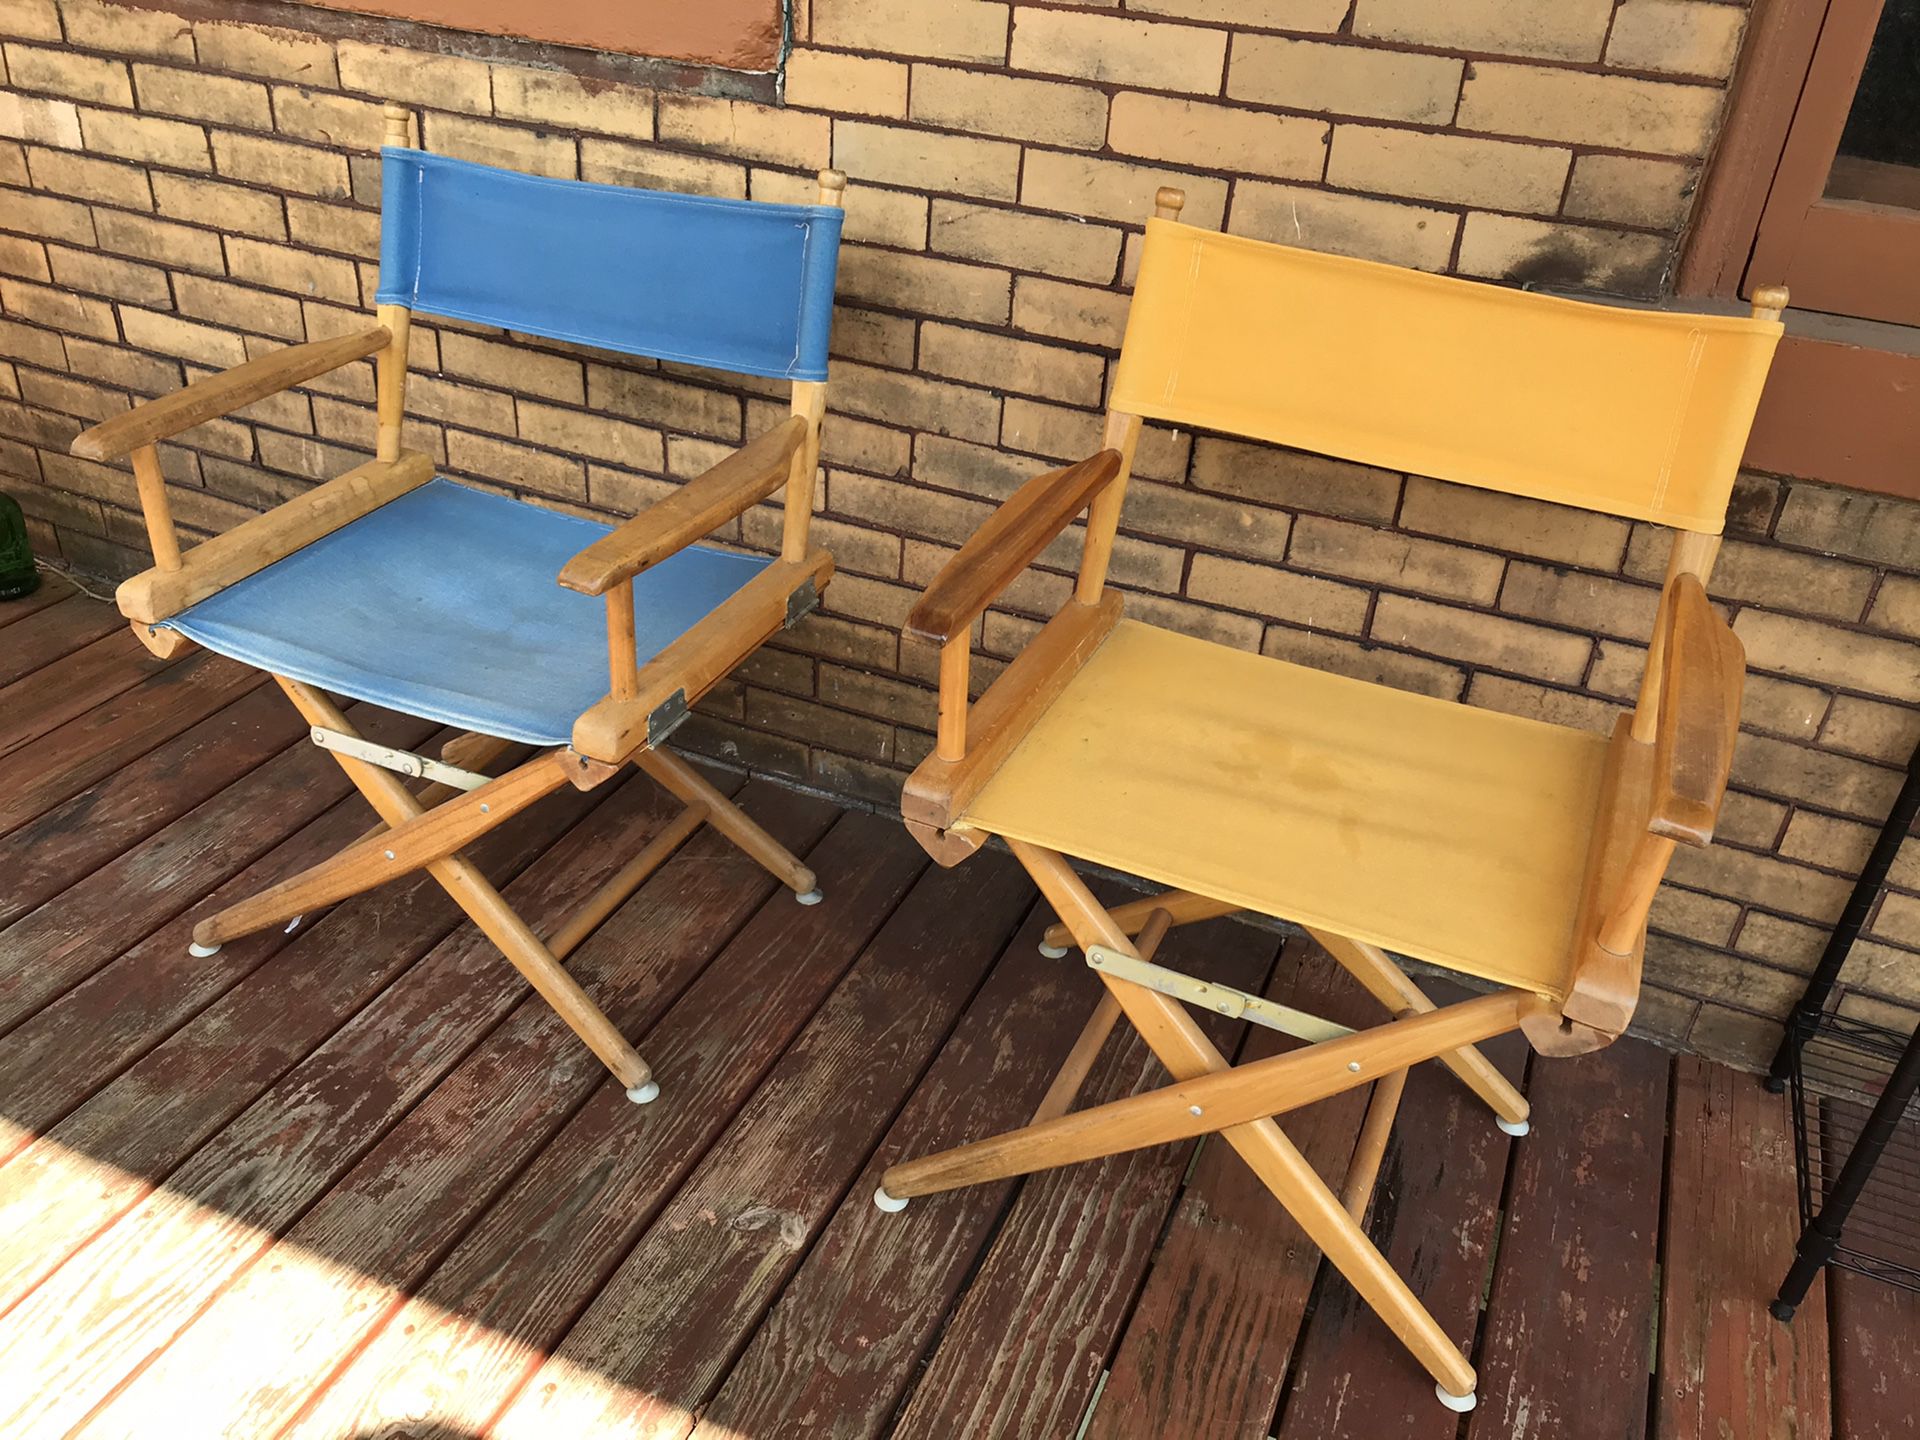 Directors chairs